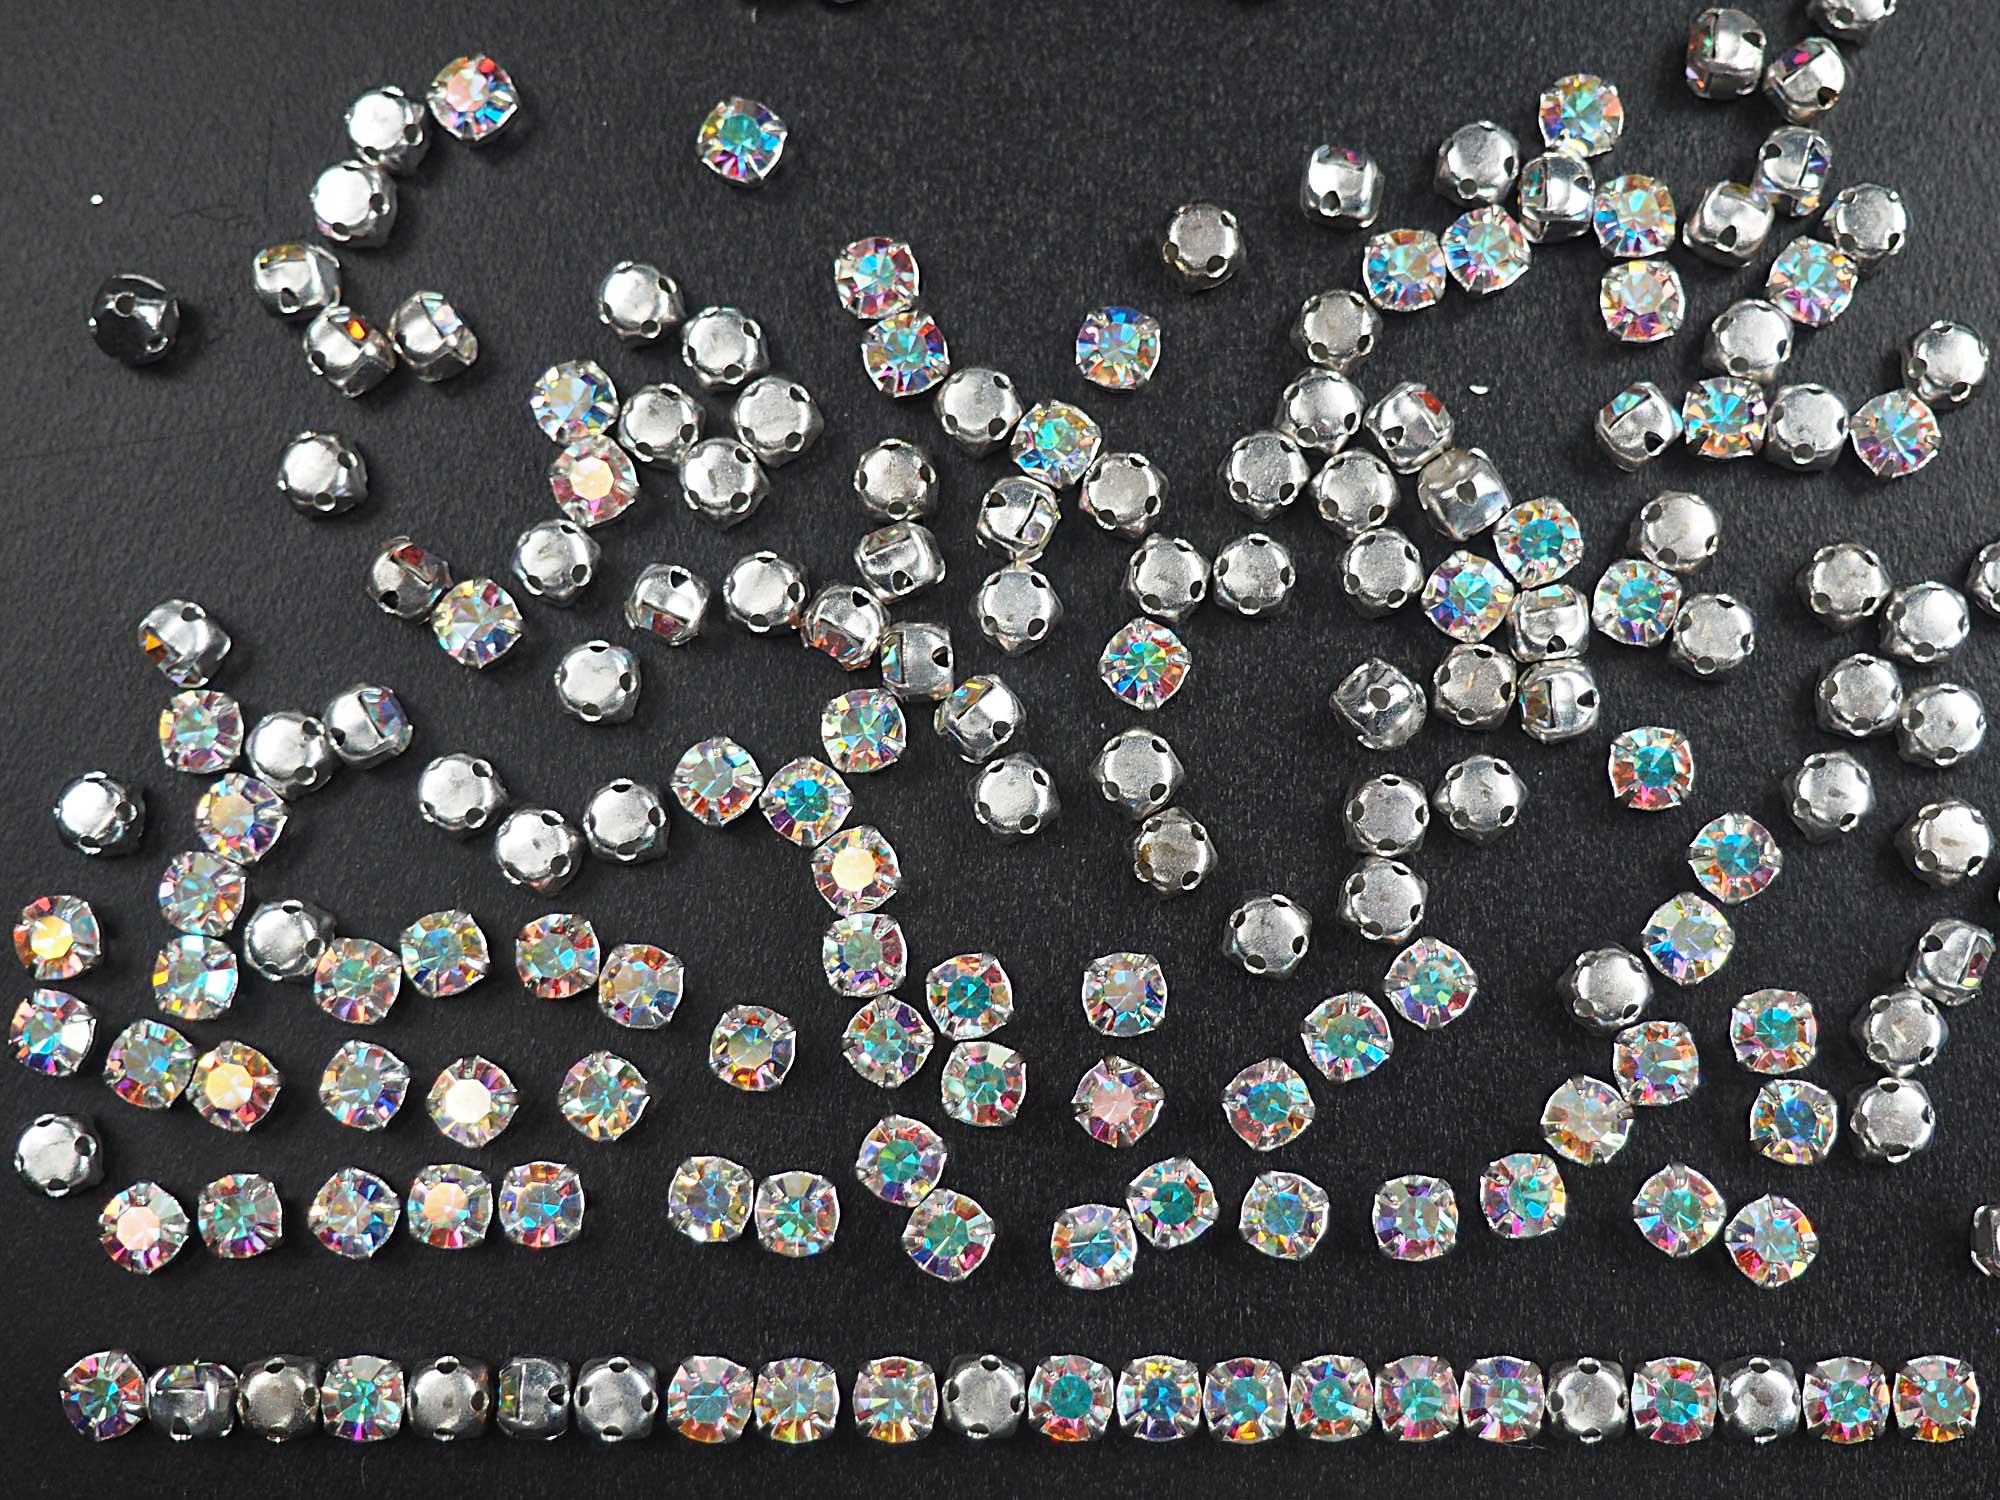 Crystal AB Preciosa Genuine Czech Chaton Montees Poined Back MC Chatons in Settings Rhodium Silver Plated SewOn Rhinestones in sizes ss34 ss40